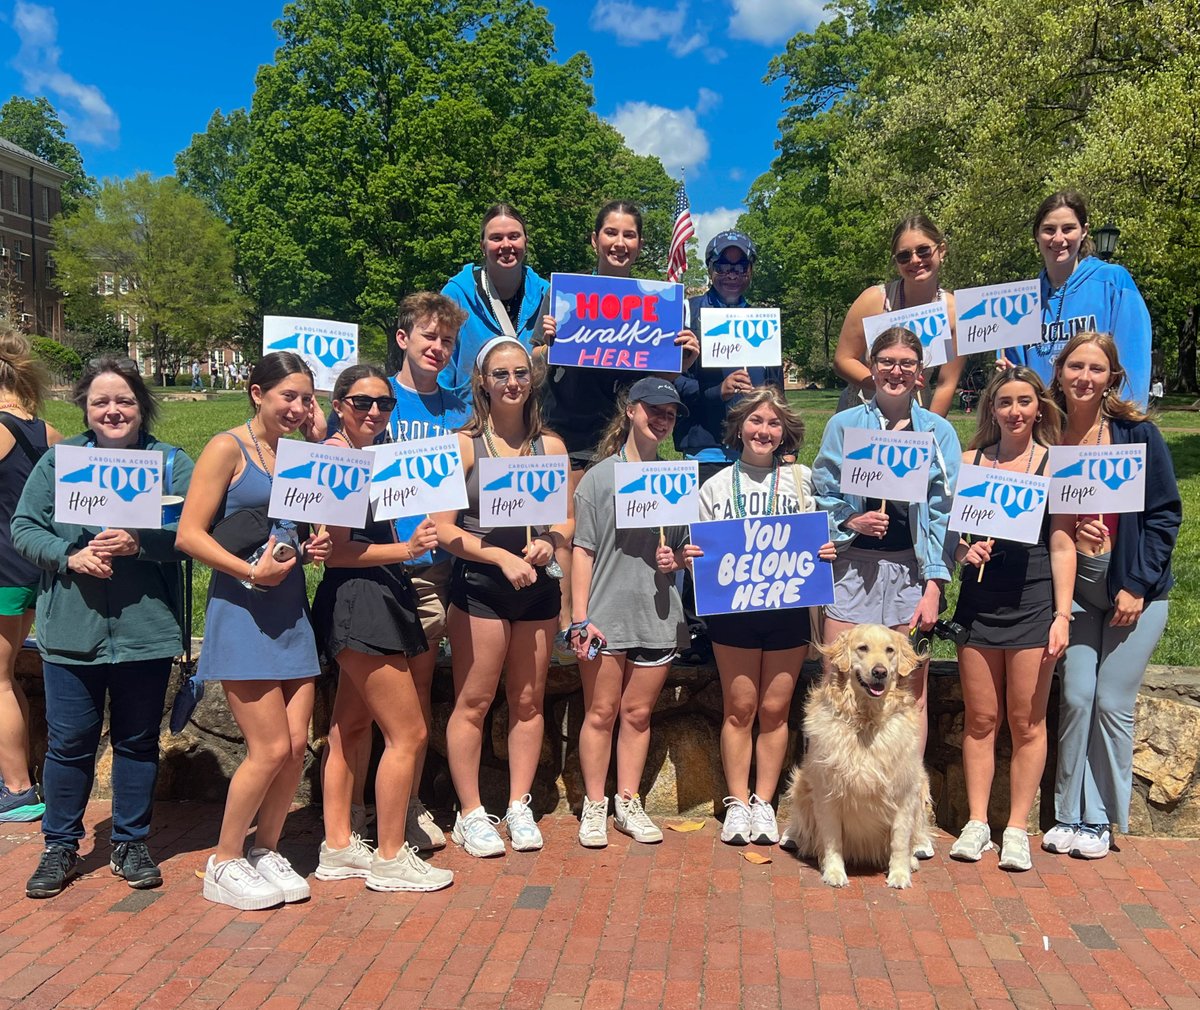 TY to everyone who came out to support the @UNC student-led Out of the Darkness Walk, raising awareness about #SuicidePrevention - and bringing hope to our campus community! Watch for a recap of this moving event, coming soon from #CarolinaAcross100: bit.ly/3OFgEDu